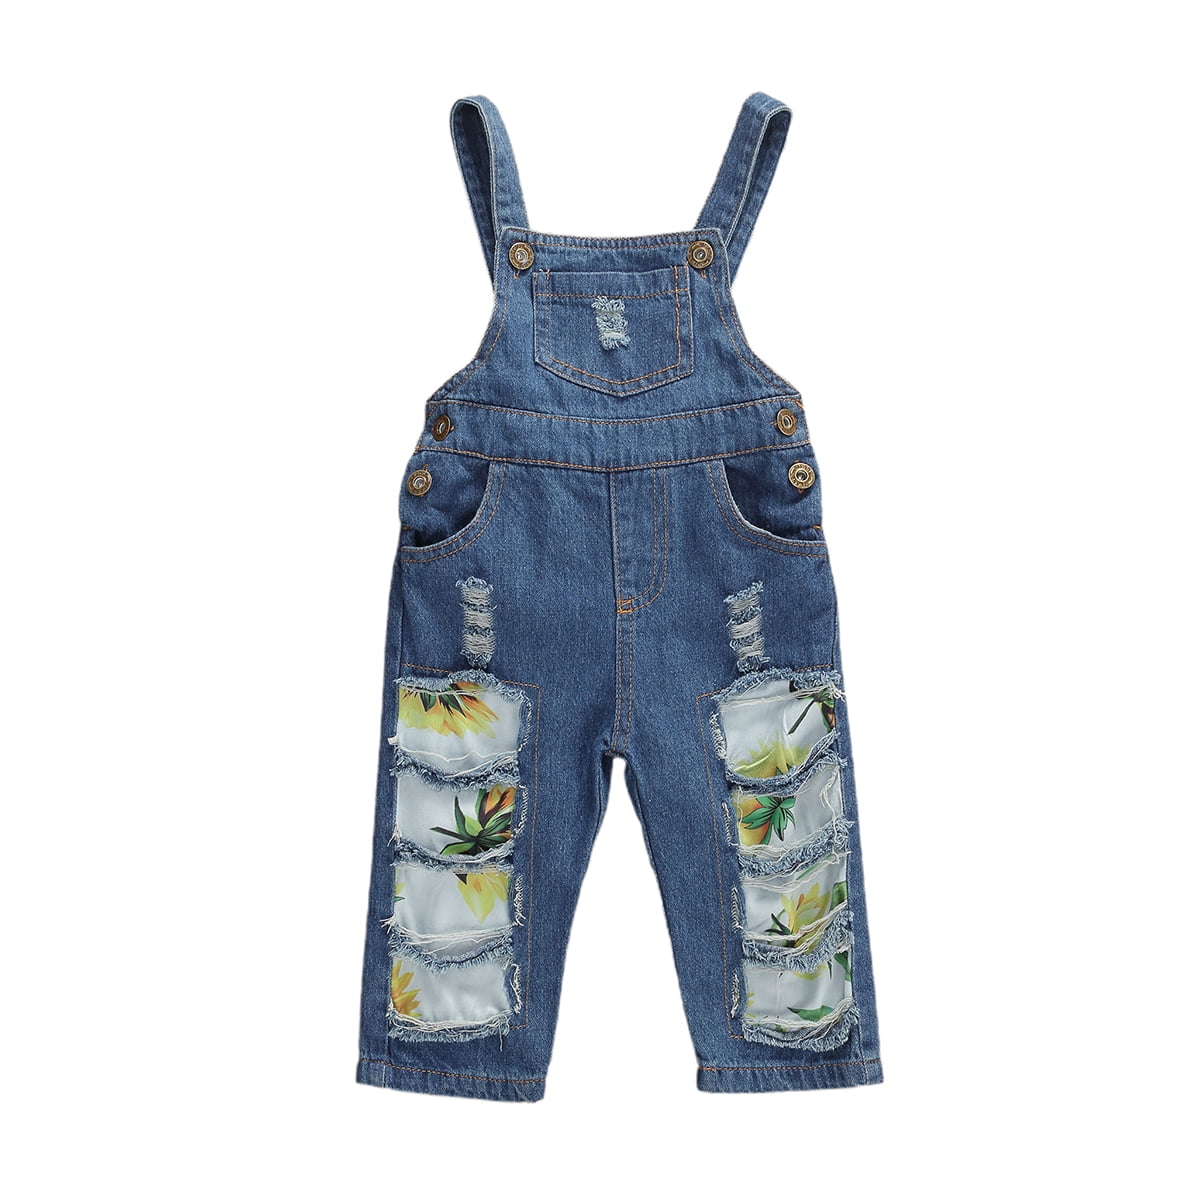 Details about   Great condition 18-24 Month 2T Baby Boy Jeans Overalls Winter Lot U pick 